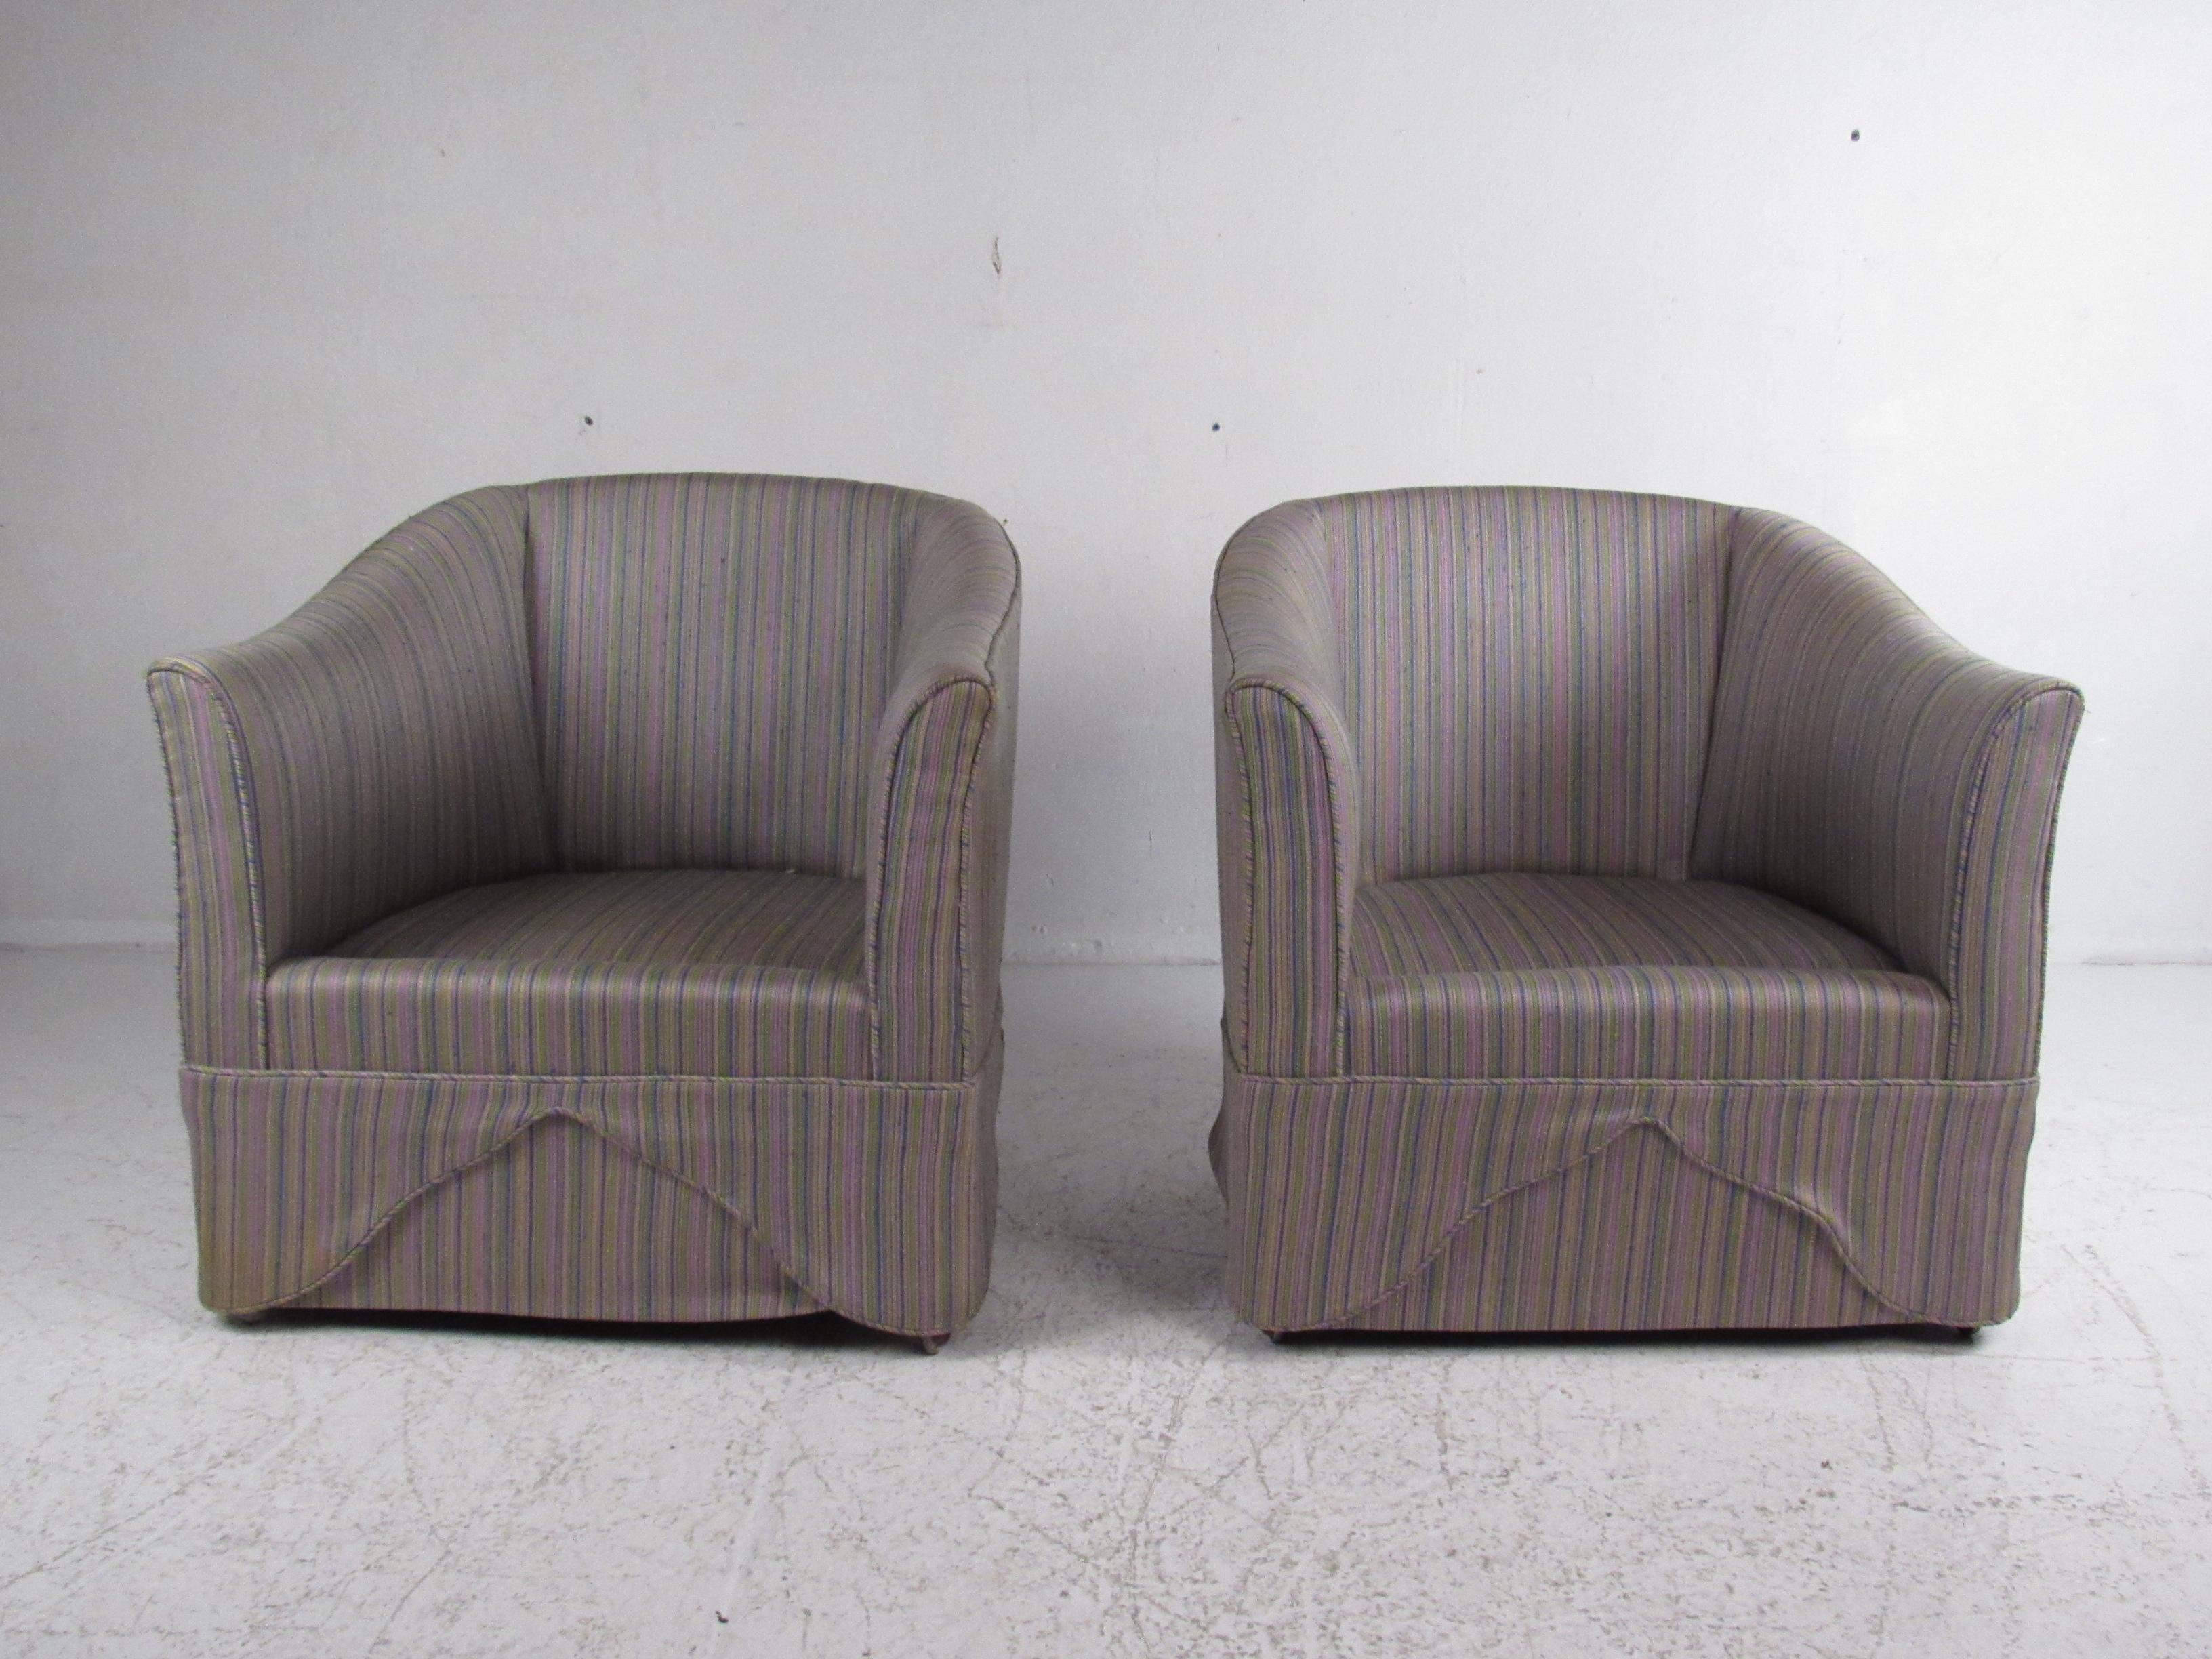 Pair of Mid-Century Modern Barrel Back Lounge Chairs For Sale 1